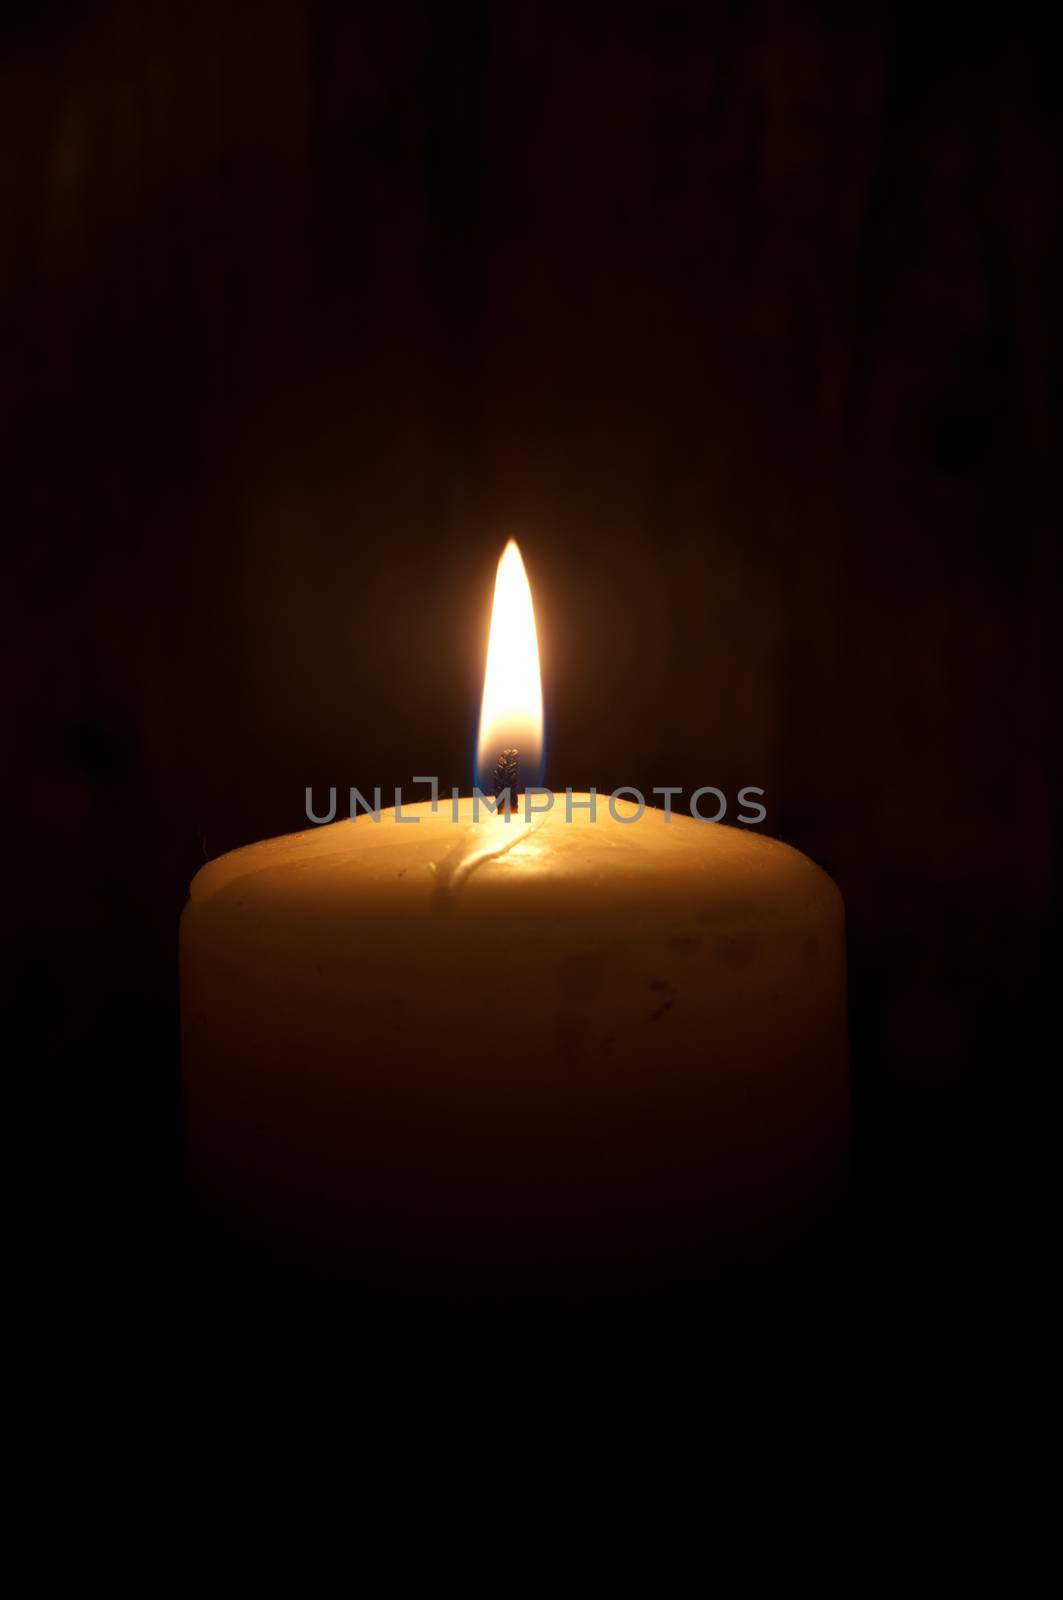 Single lit candle in the dark (also space for text)